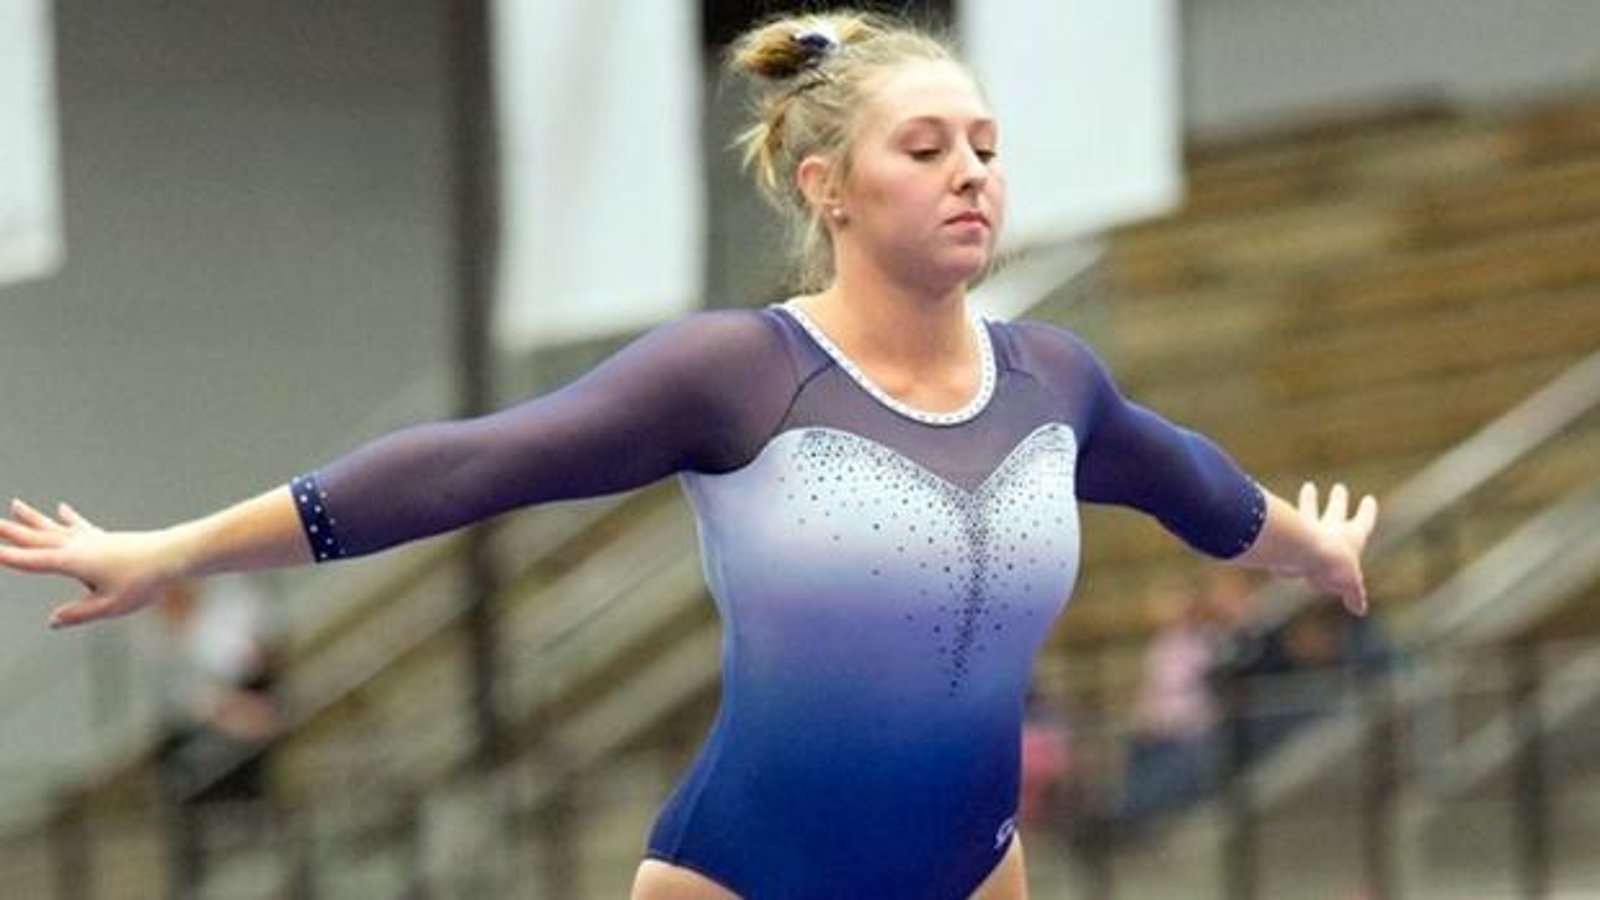 College gymnast Melanie Coleman dies after terrible fall during practice 